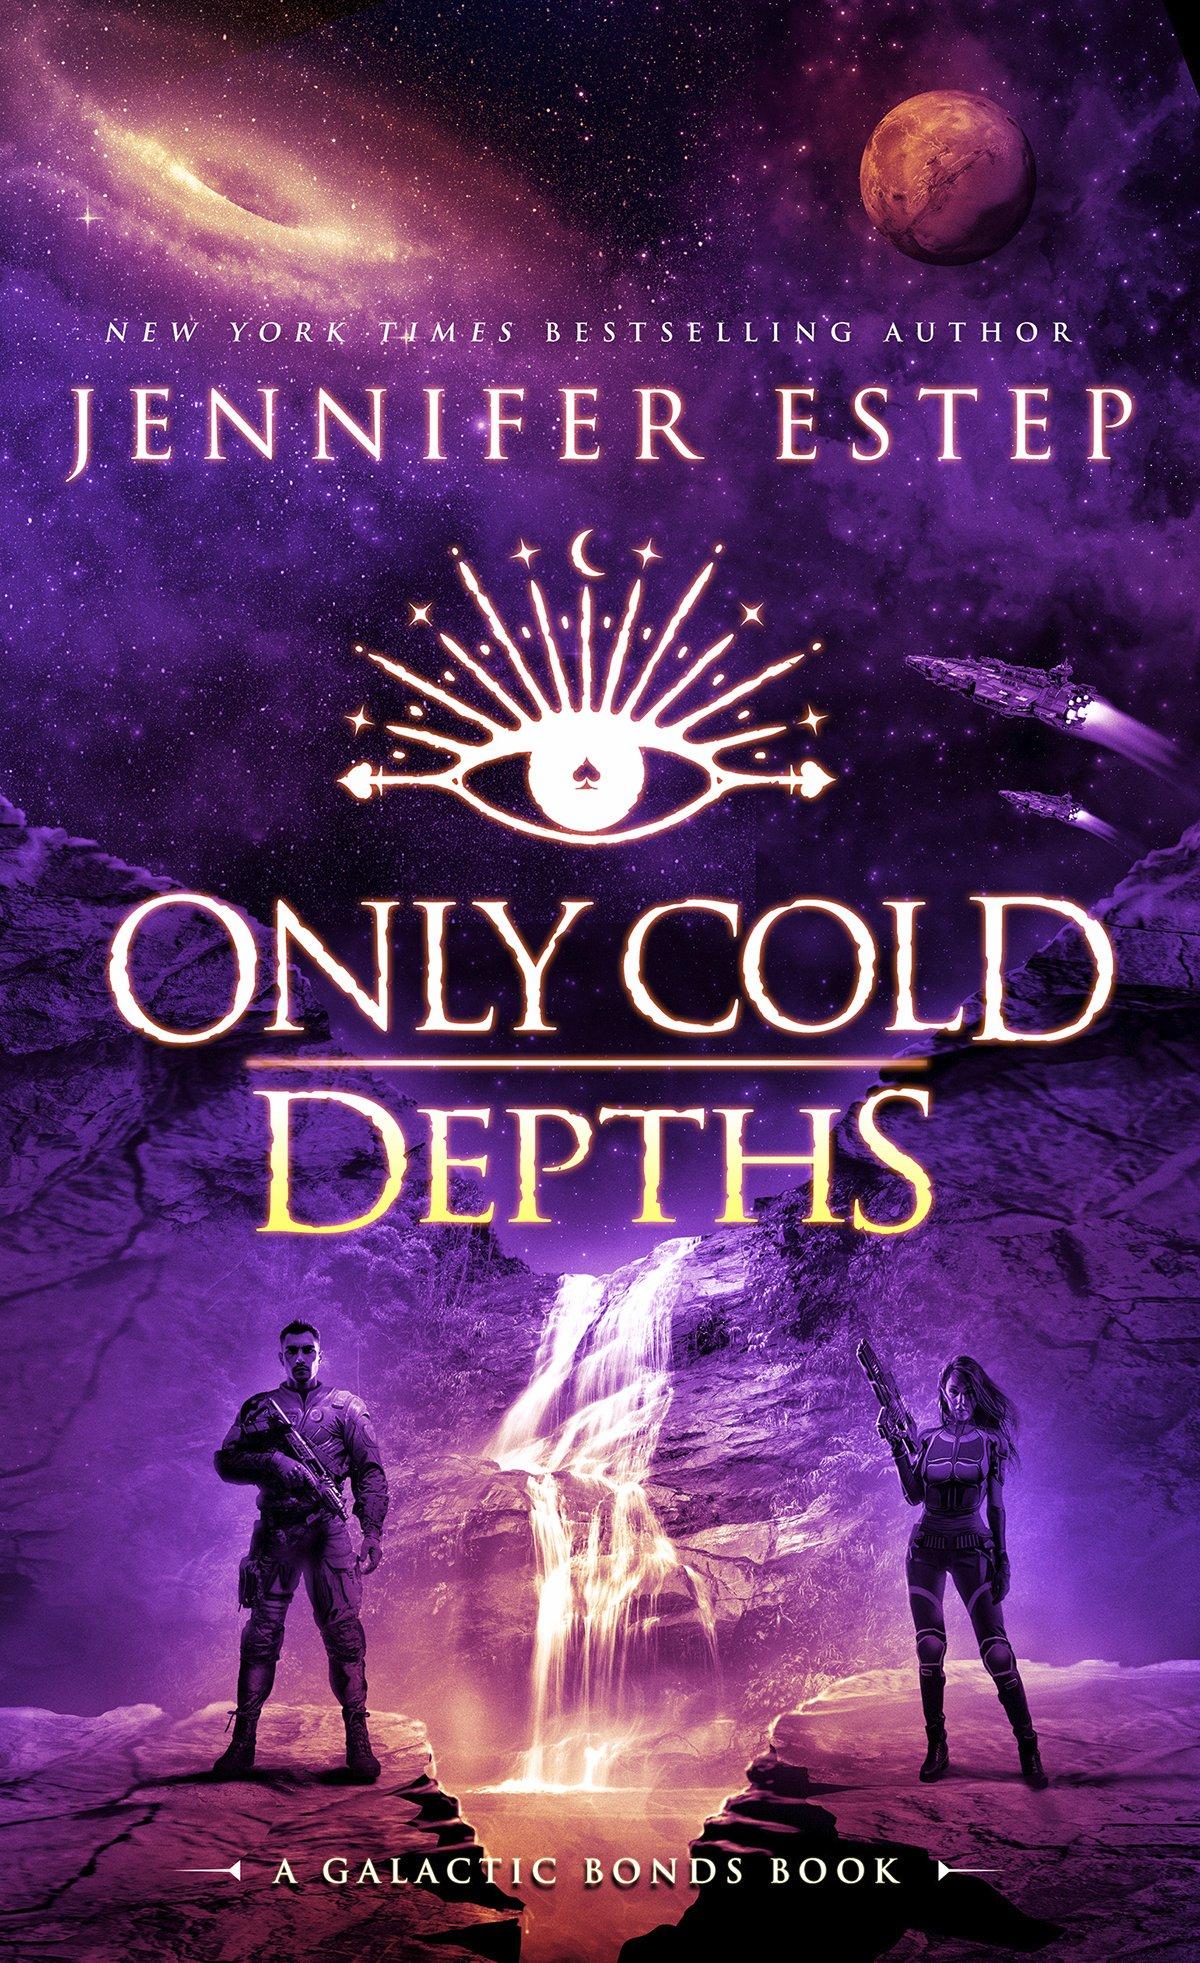 Only Cold Depths